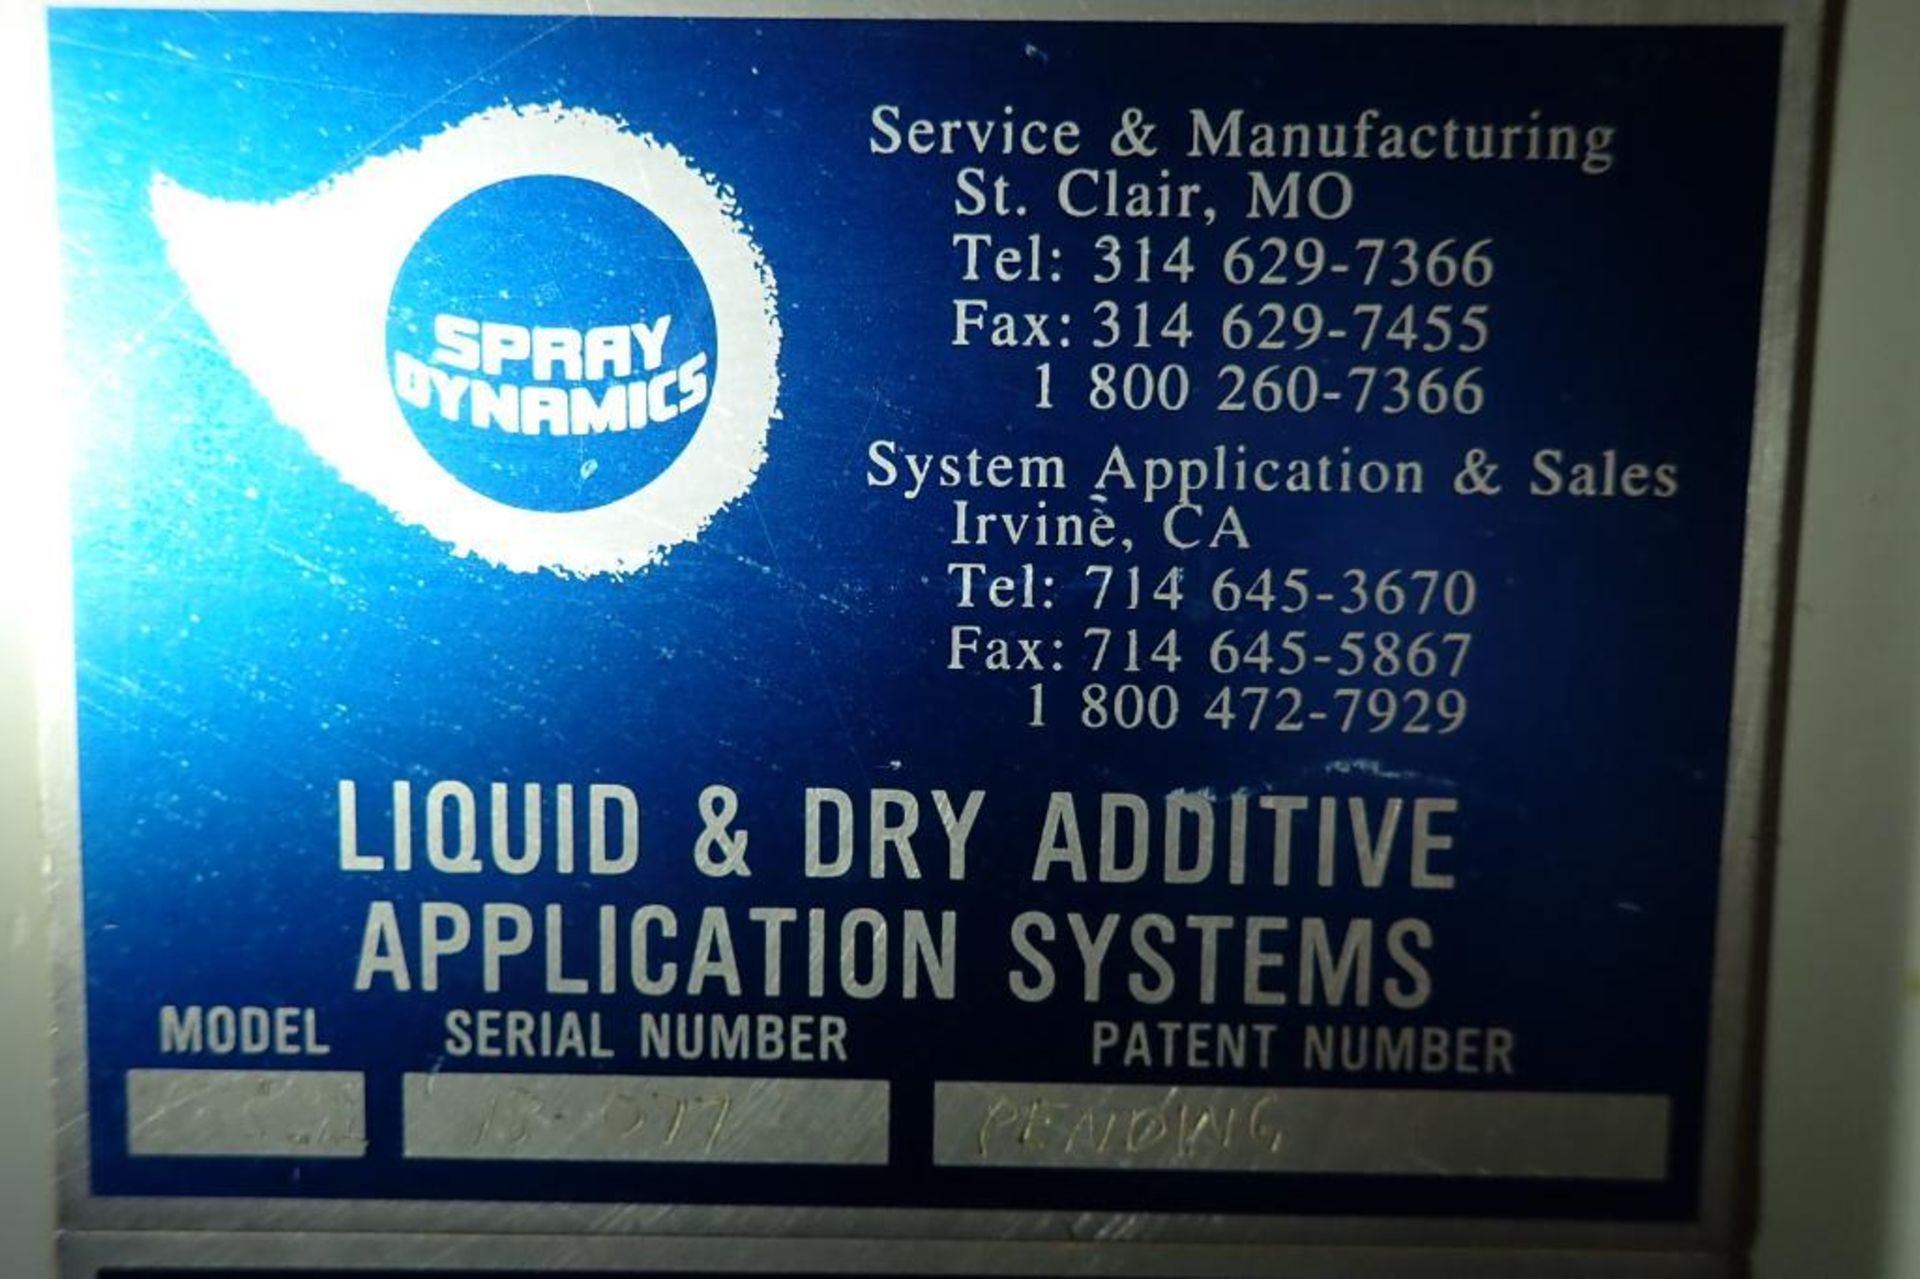 Spray Dynamics liquid and dry additive system. {Located in Visalia, CA} - Image 23 of 25